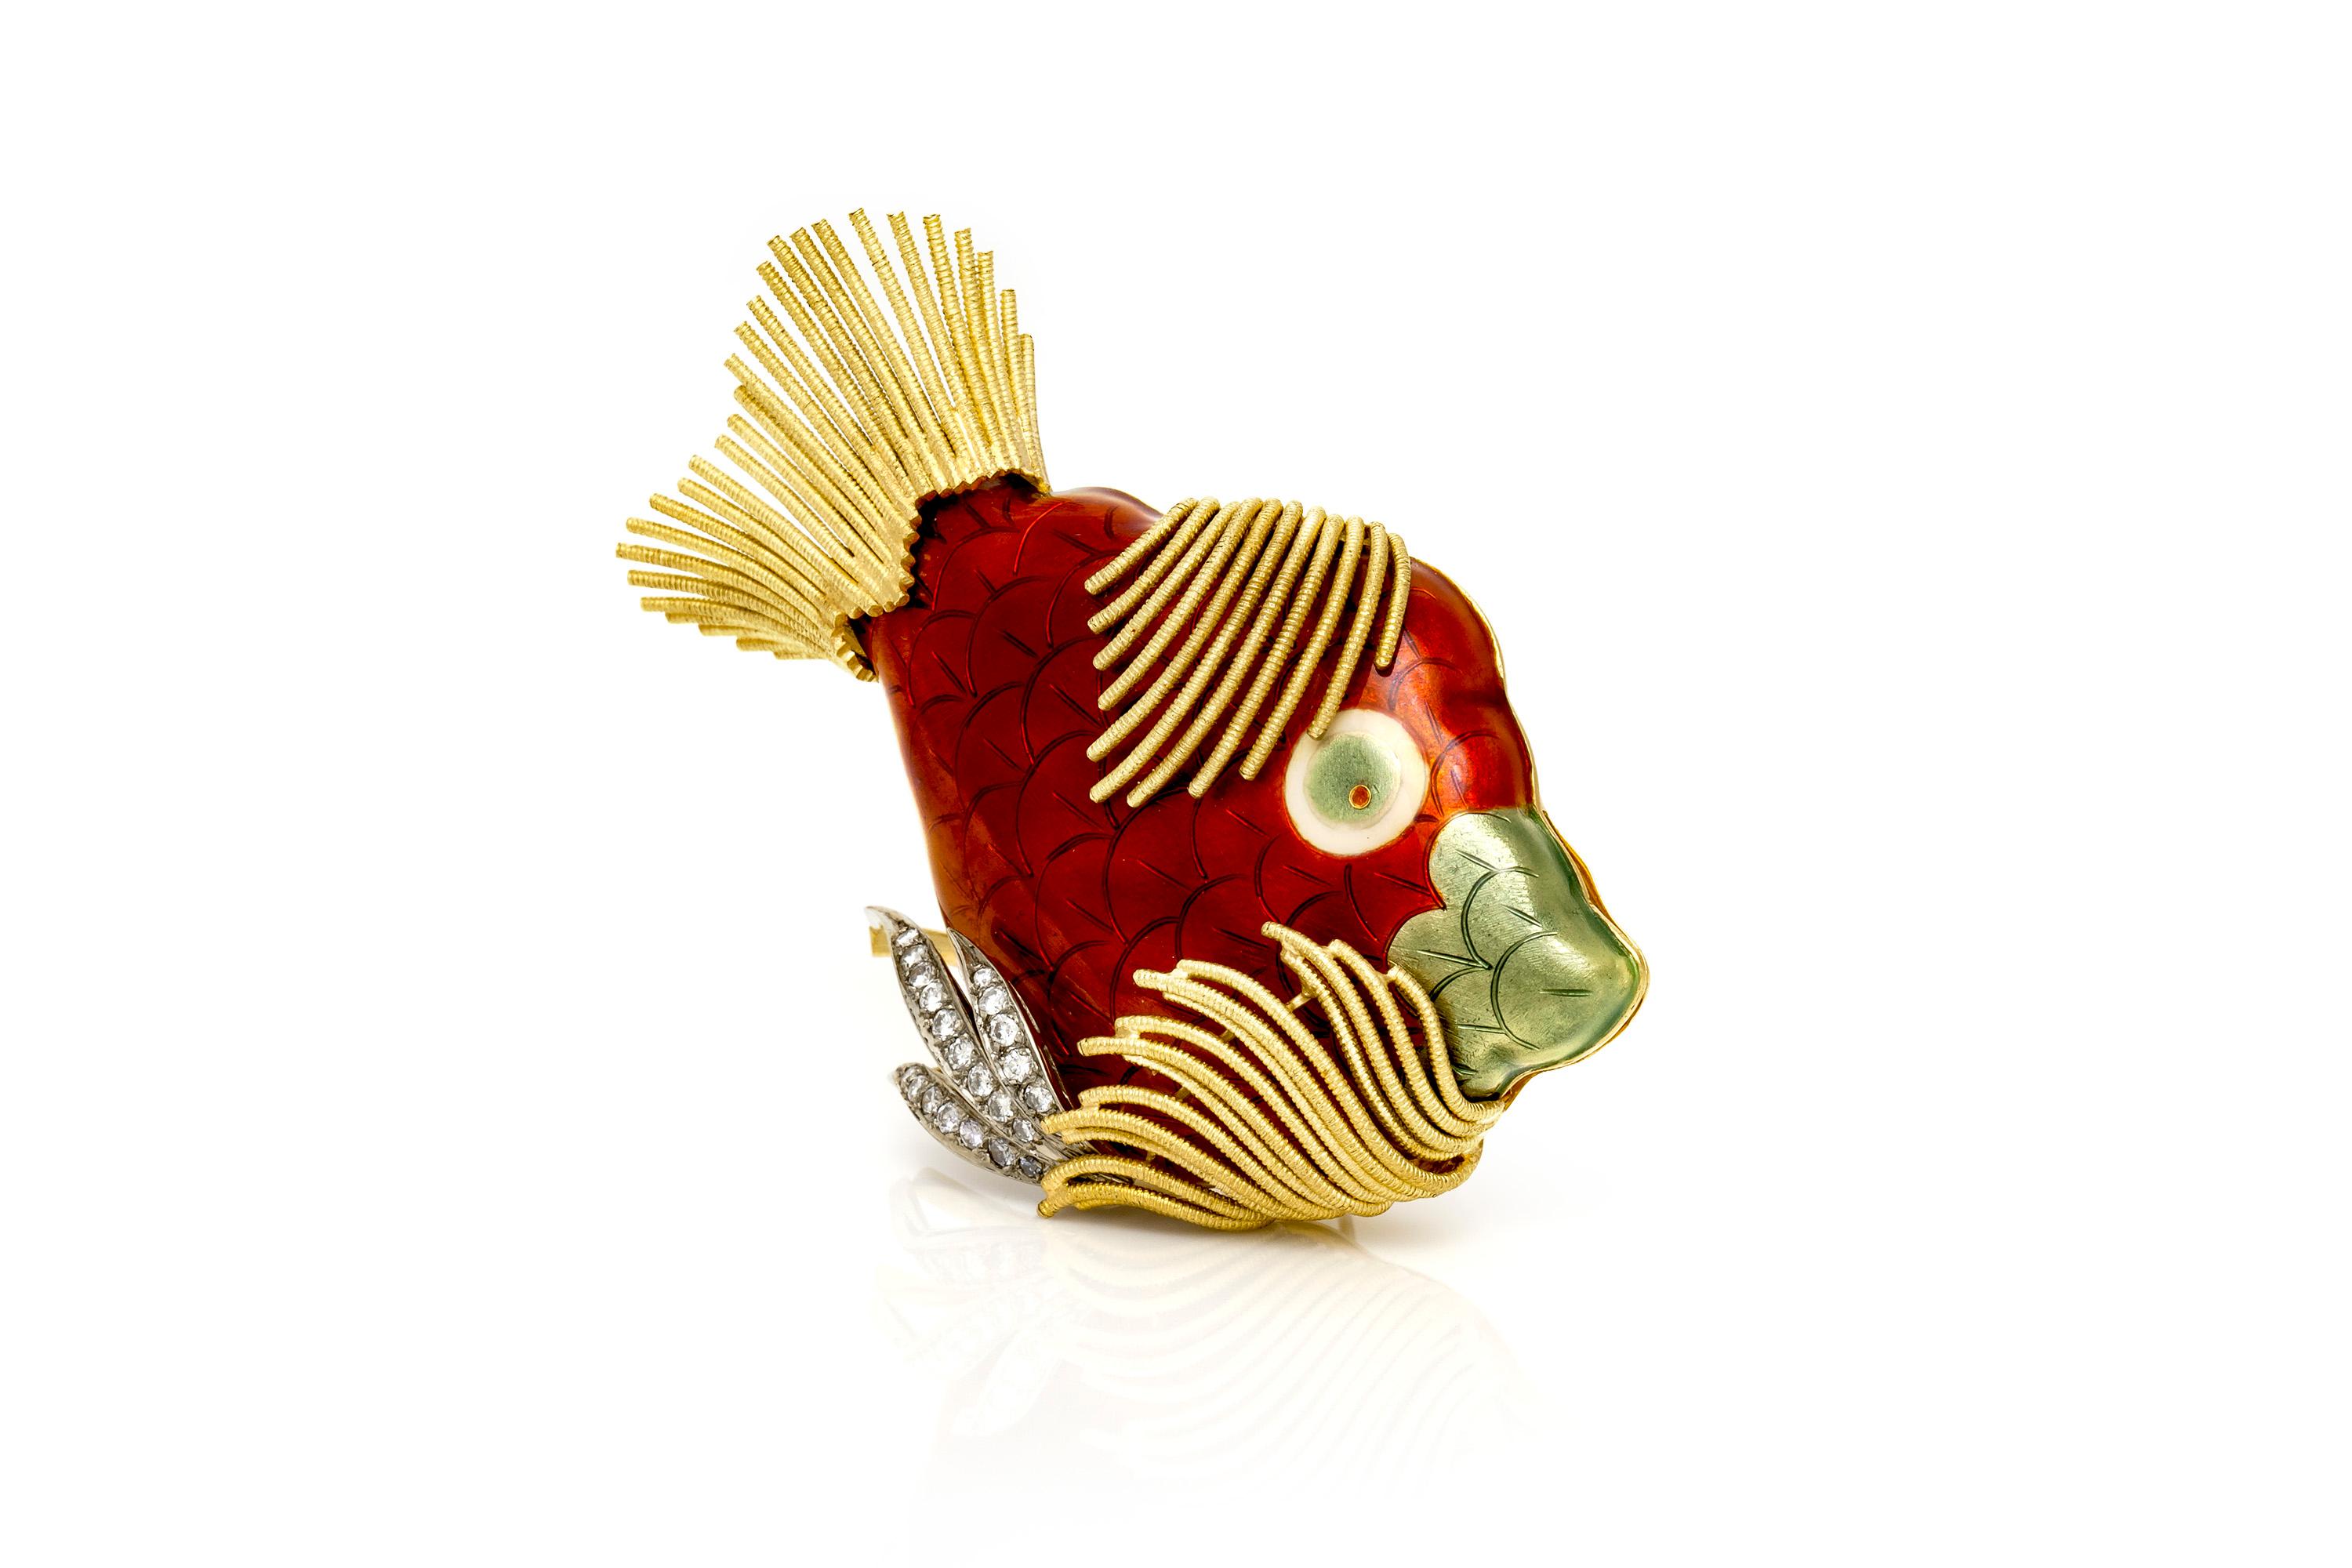 Enamel fish brooch finely crafted in 18 k yellow gold and platinum with red enamel and featuring weighing approximately a total of 1.00 carat.